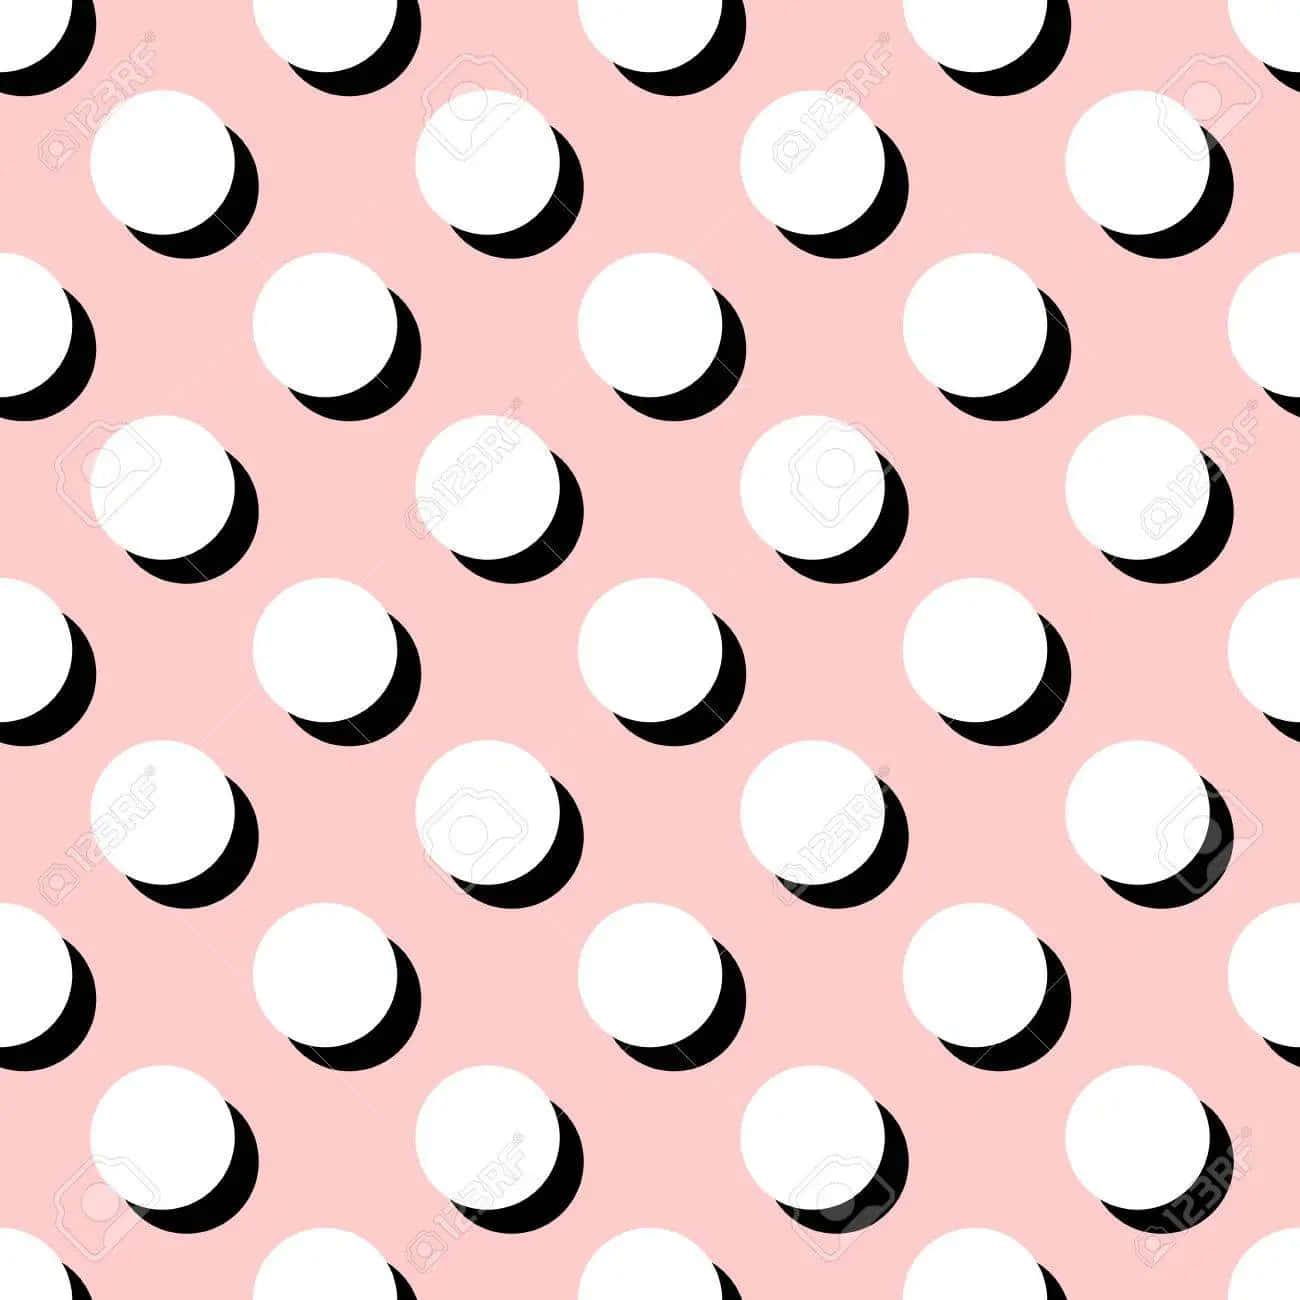 A Pink Background With Black And White Circles Wallpaper